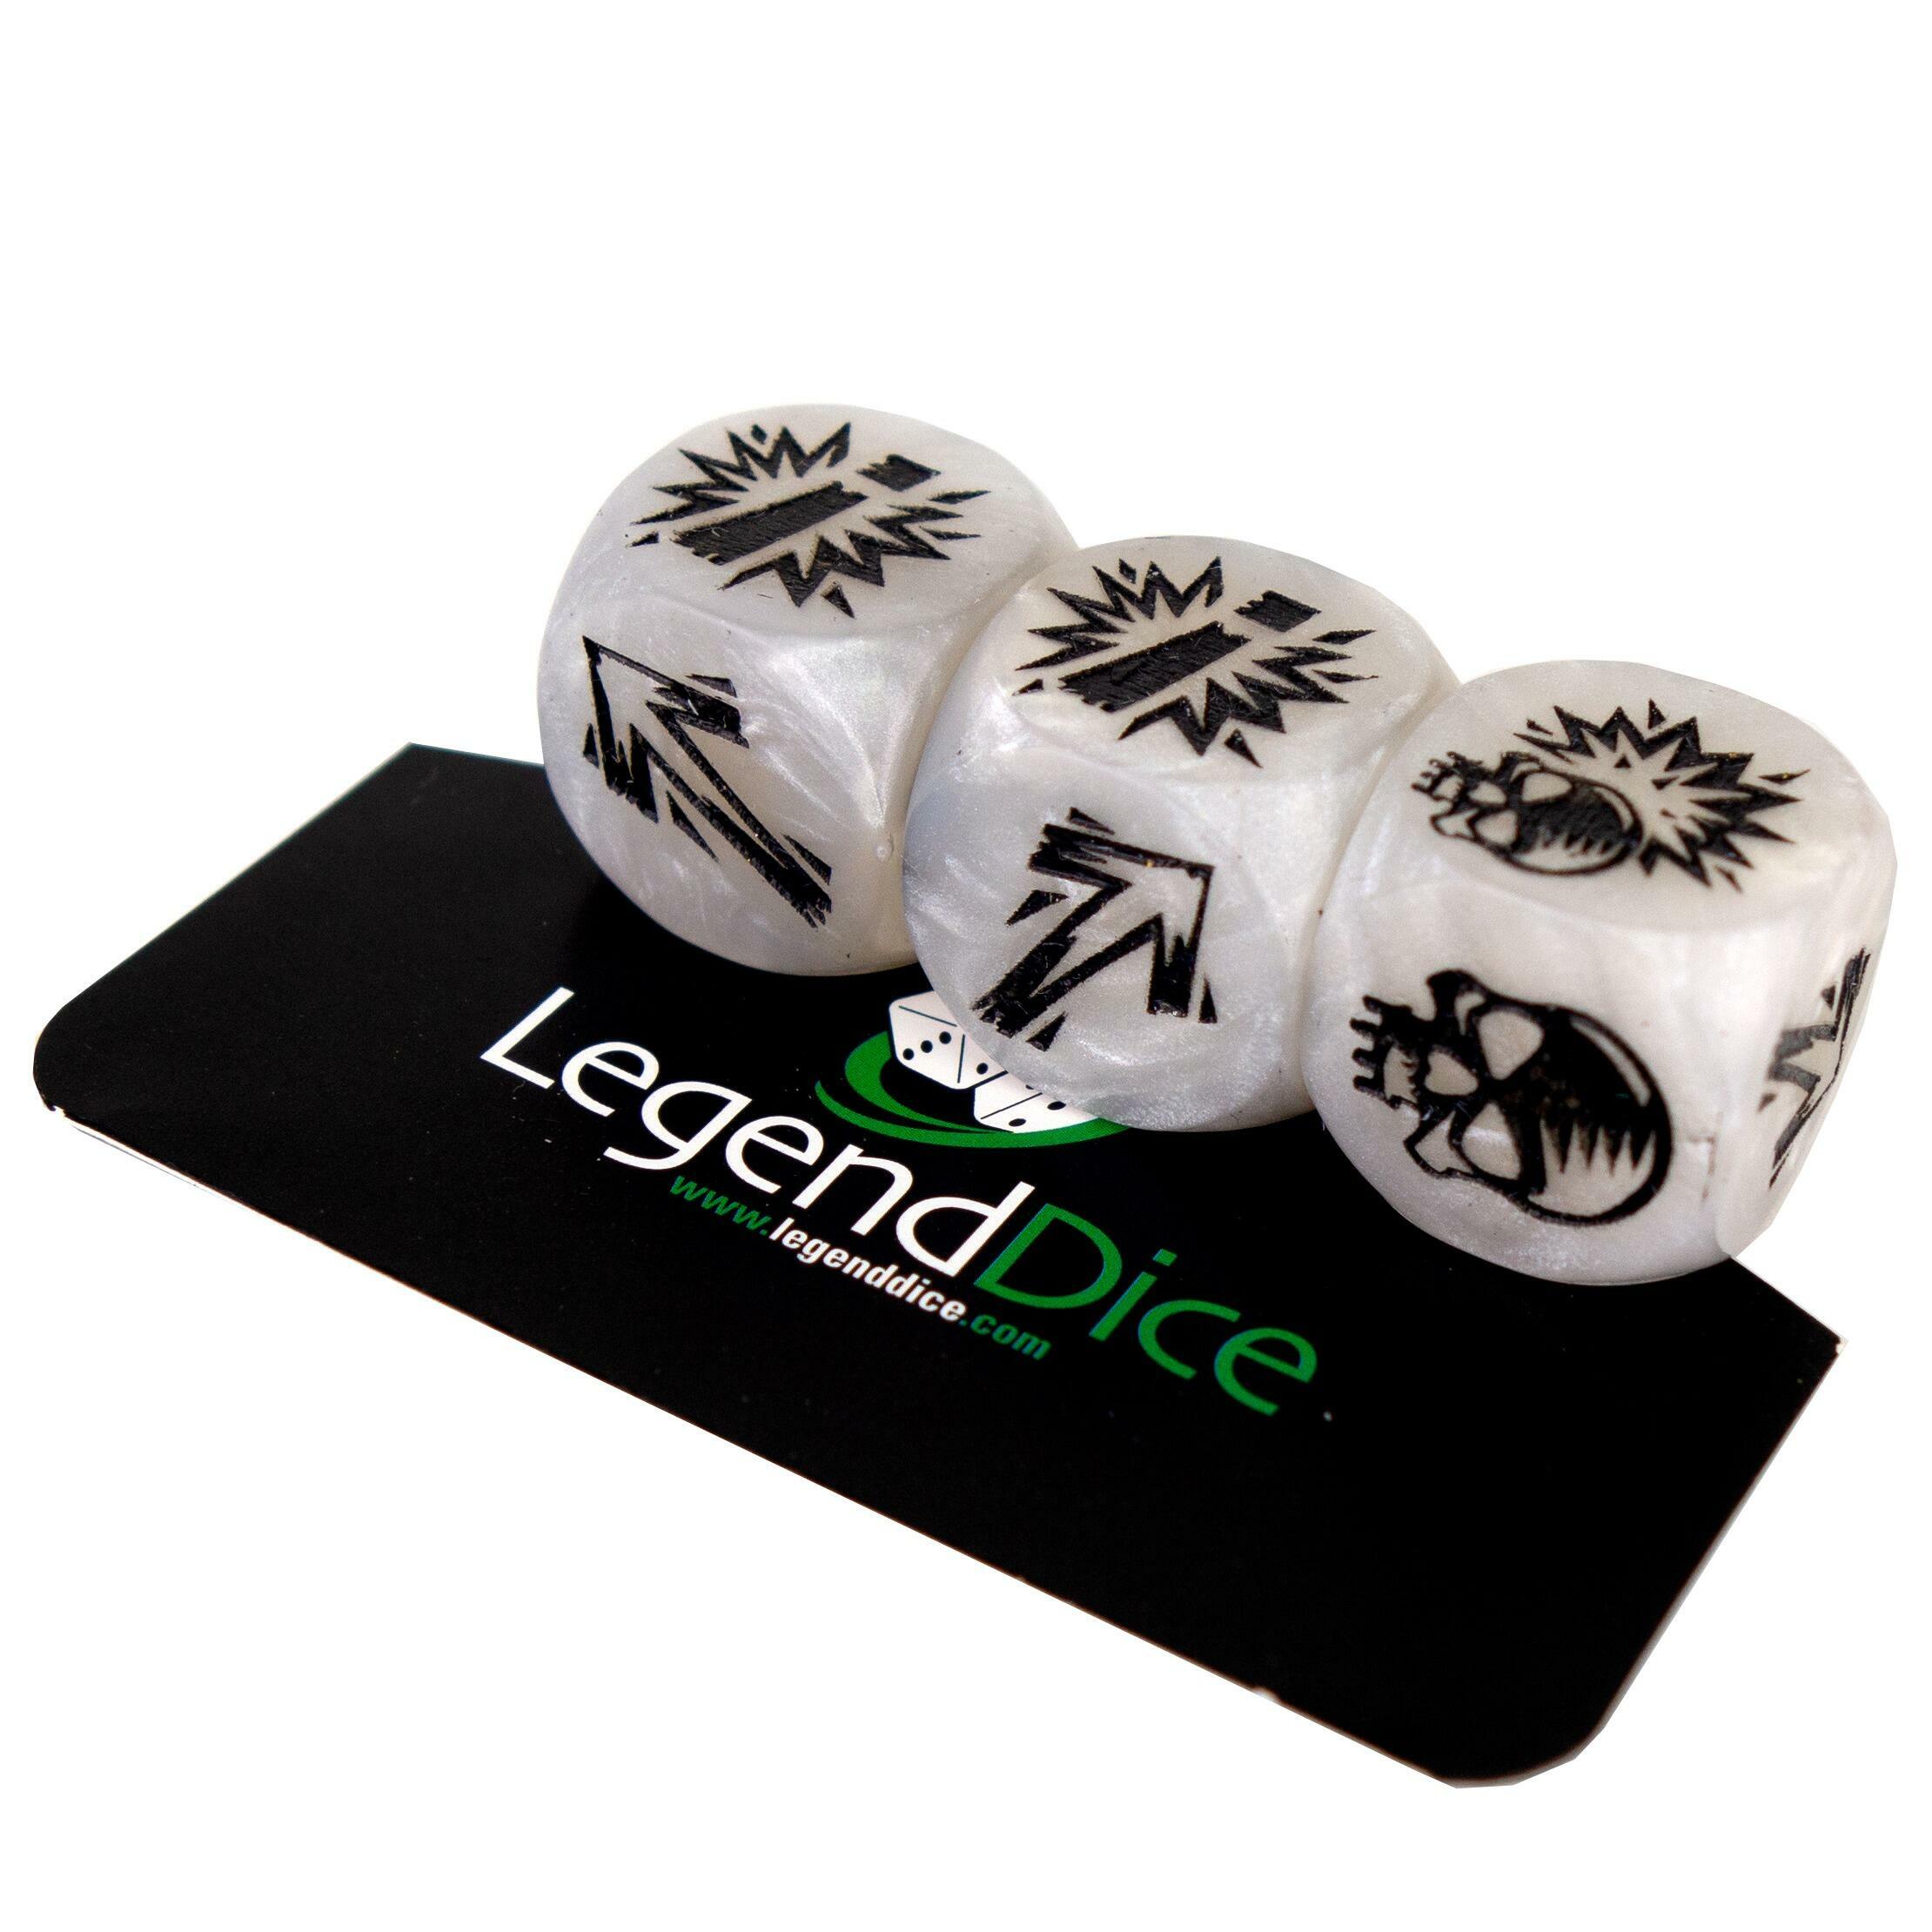 Picture of Blocking Dice Set - Pearl White (Black) with bag